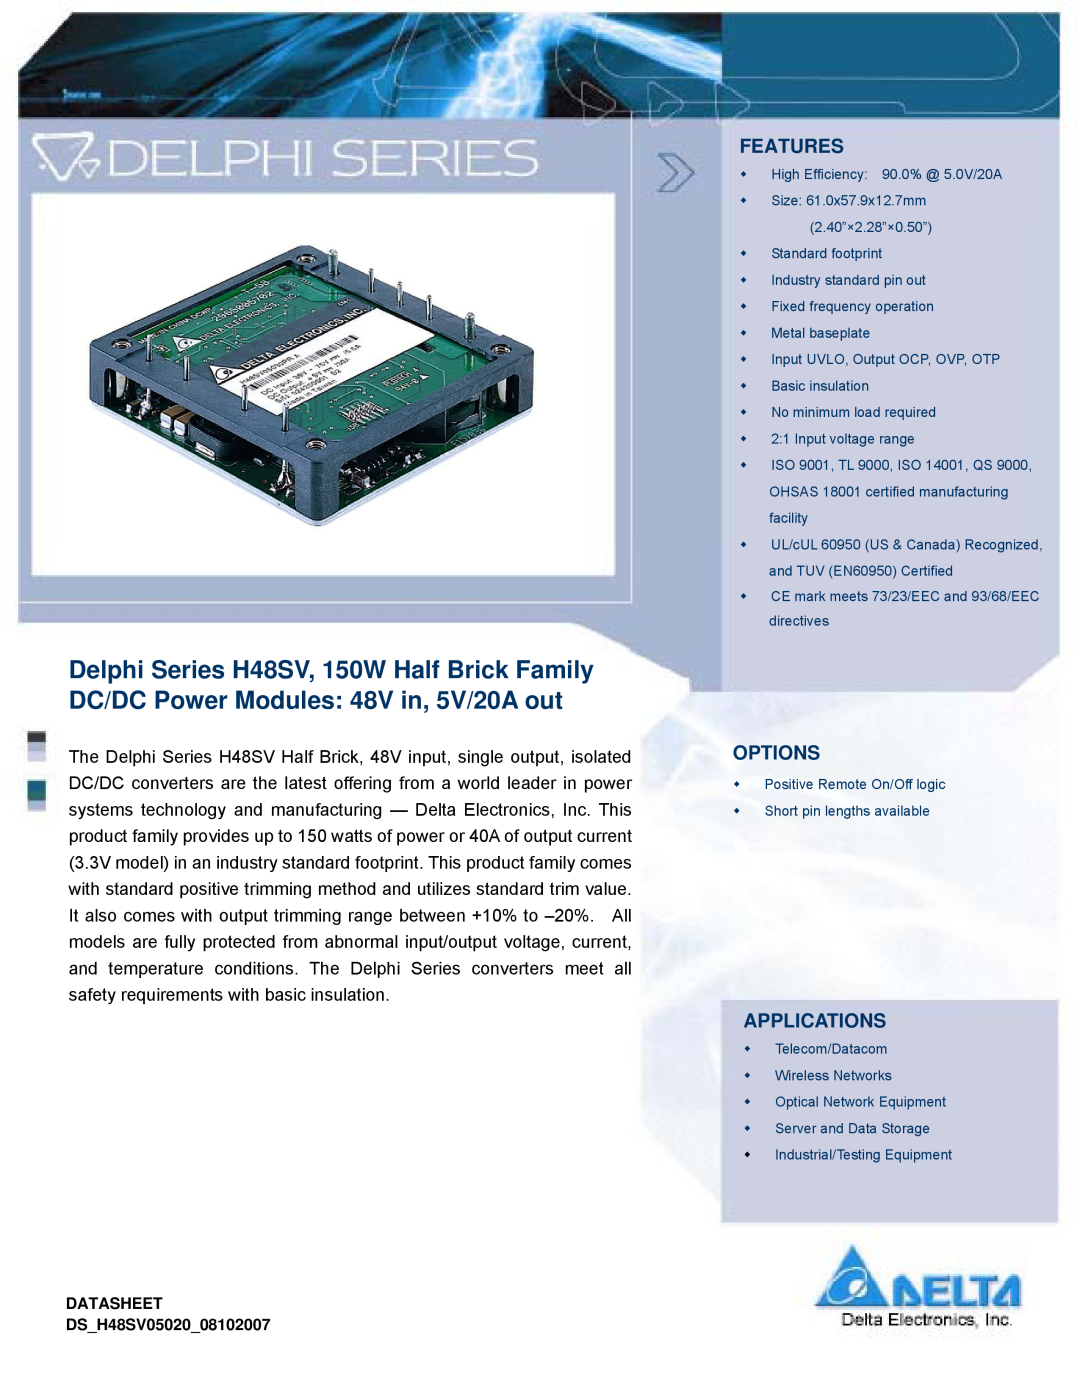 Delta Electronics Series H48SV manual Features, Options, Applications, DATASHEET DSH48SV0502008102007 